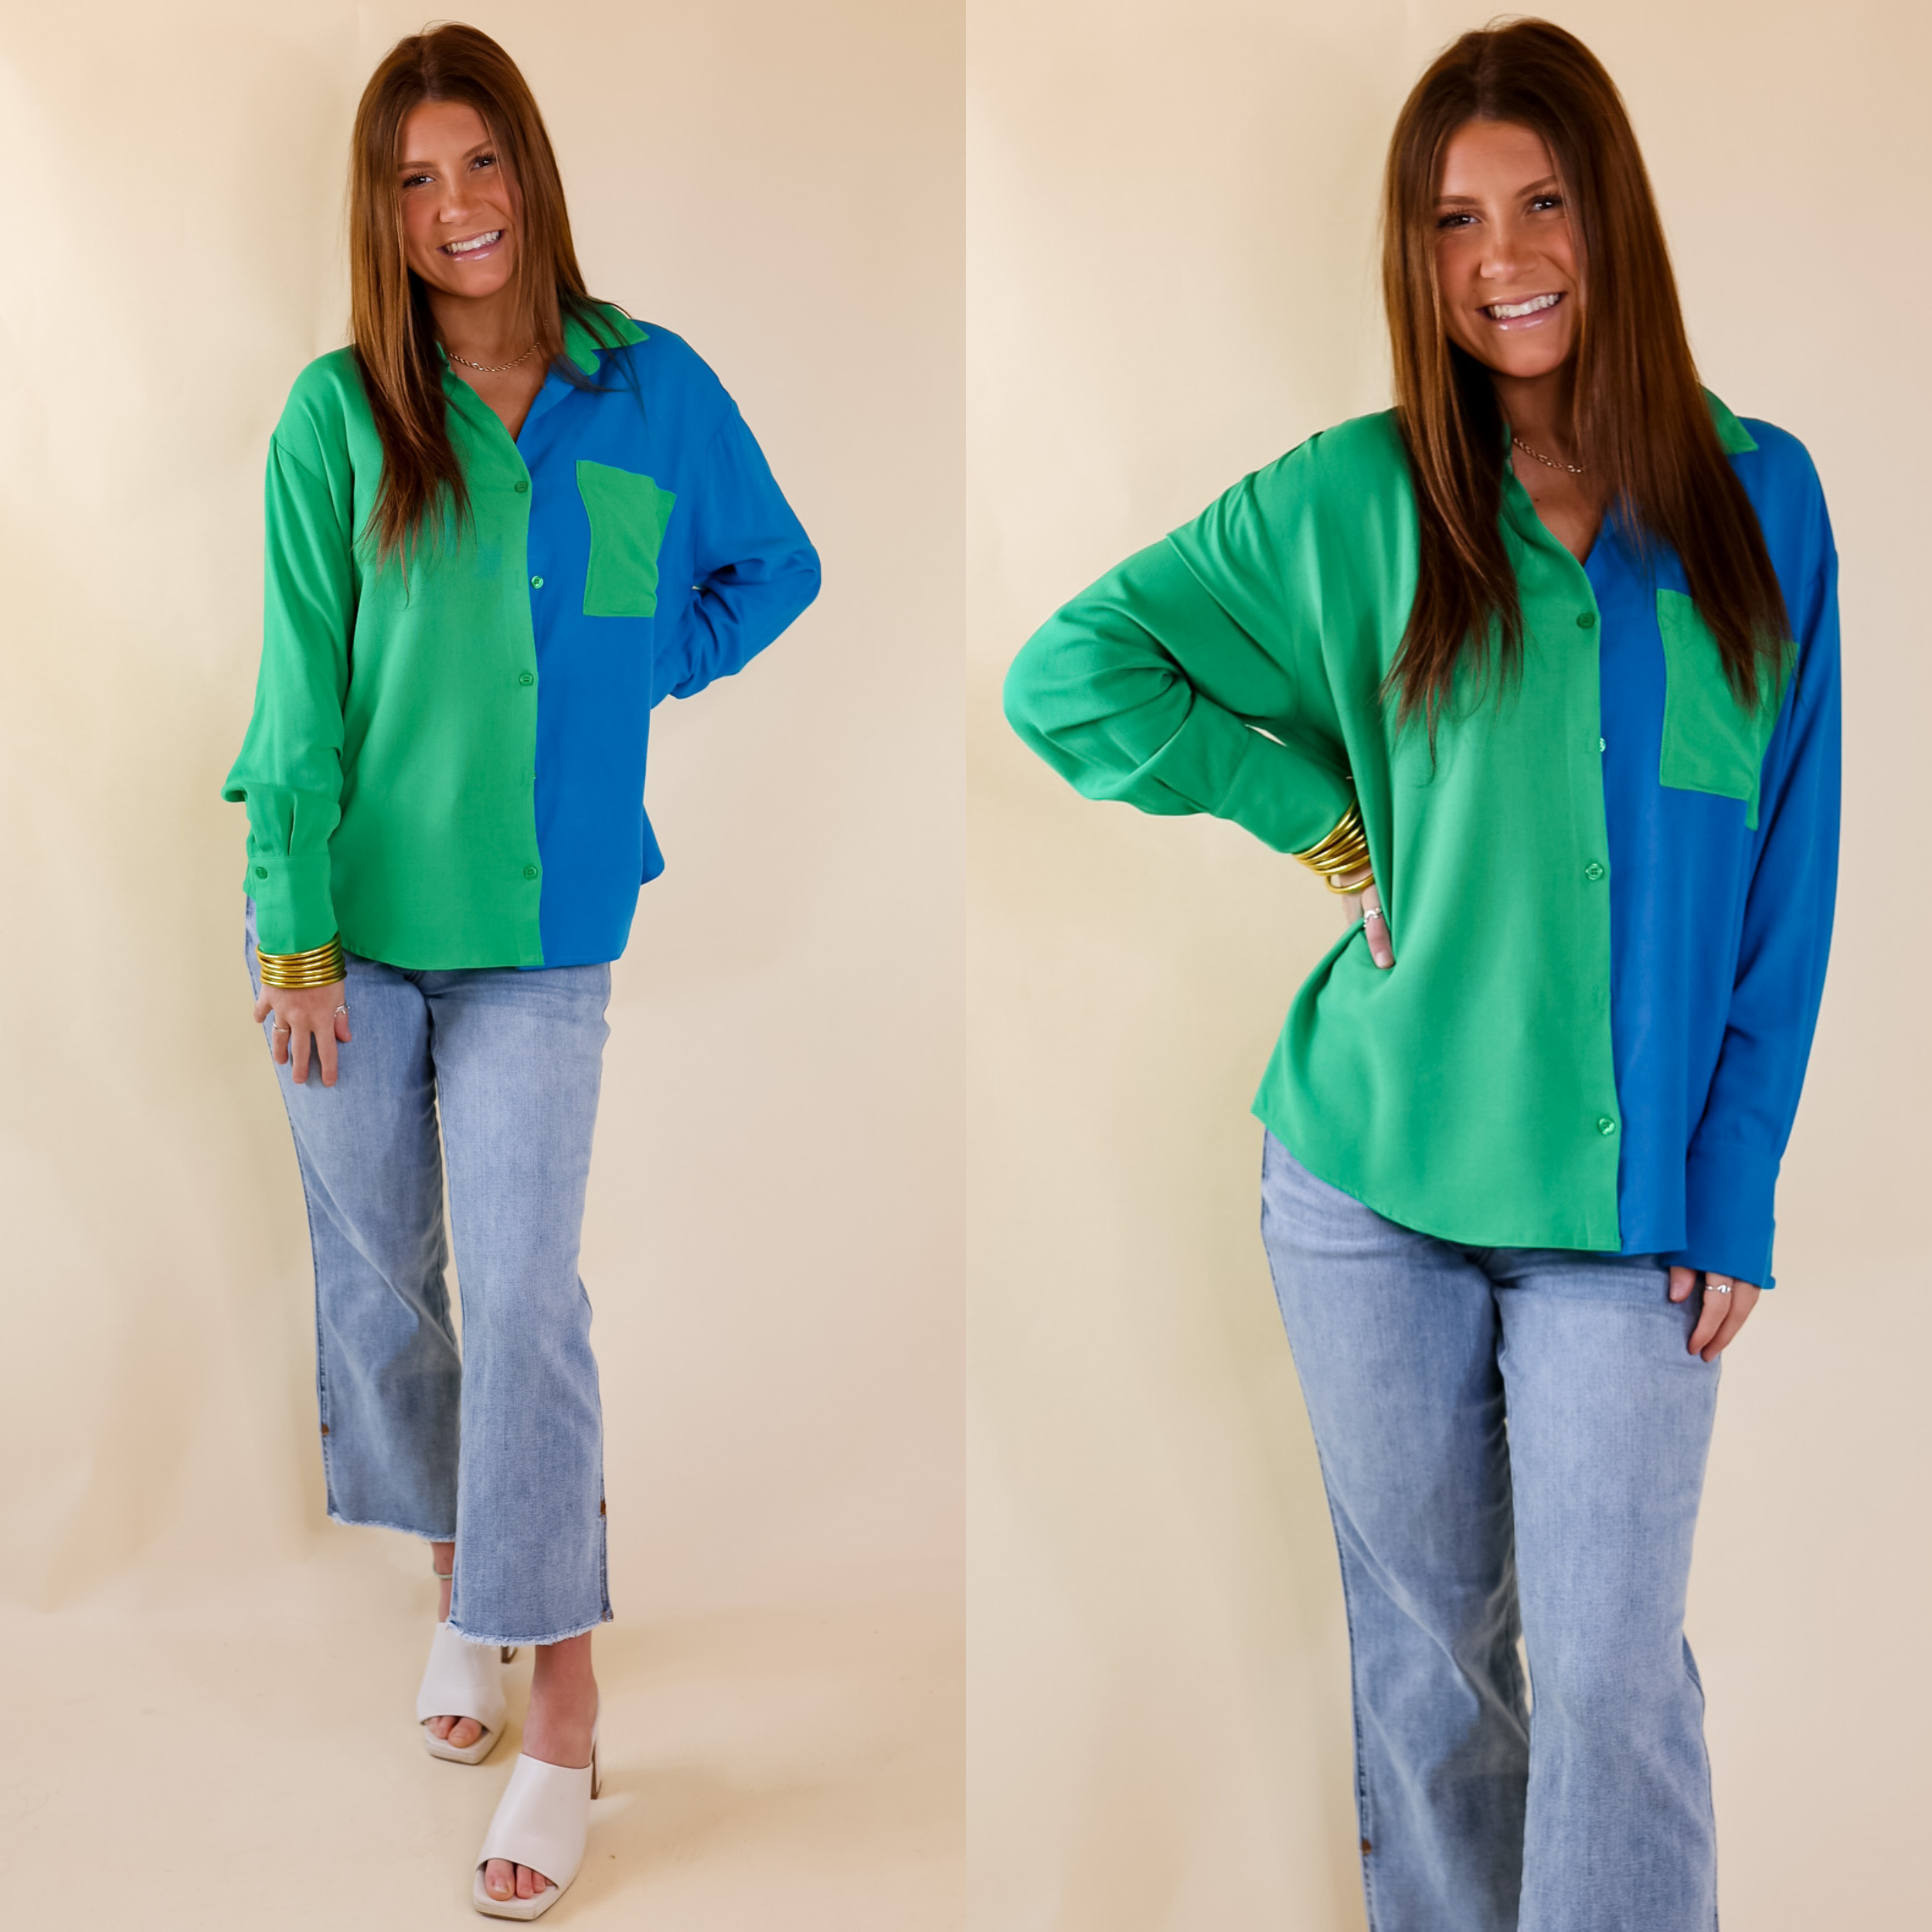 A long sleeve button up shirt with a split dye design. The right half is green and the left is blue with a green pocket. Item is pictured on a pale pink back ground.